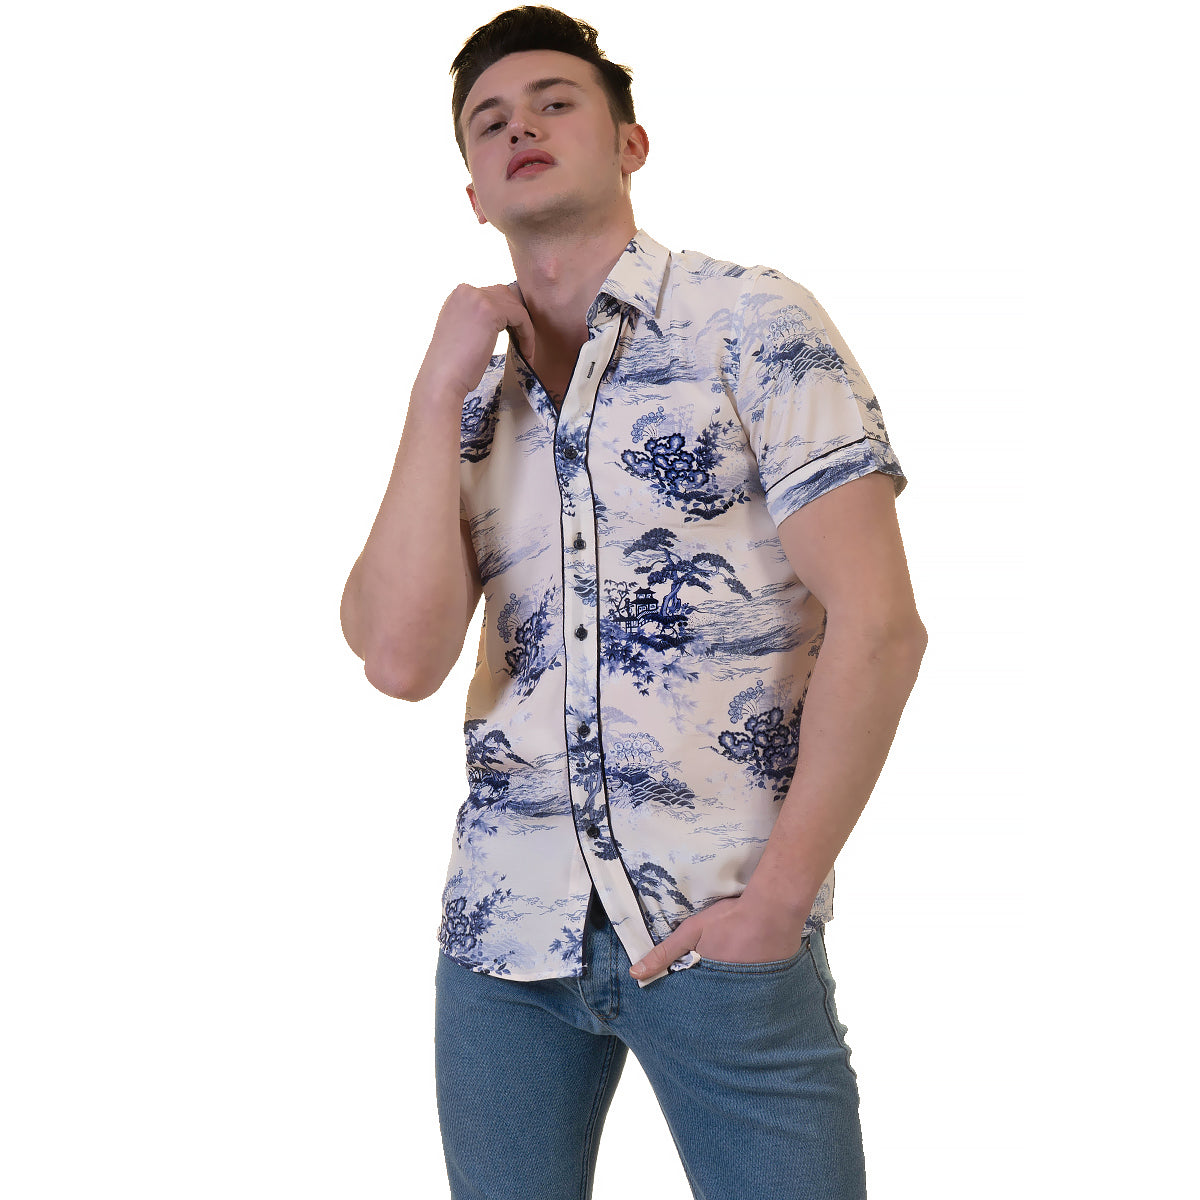 Floral Mens Short Sleeve Button up Shirts - Tailored Slim Fit Cotton Dress Shirts